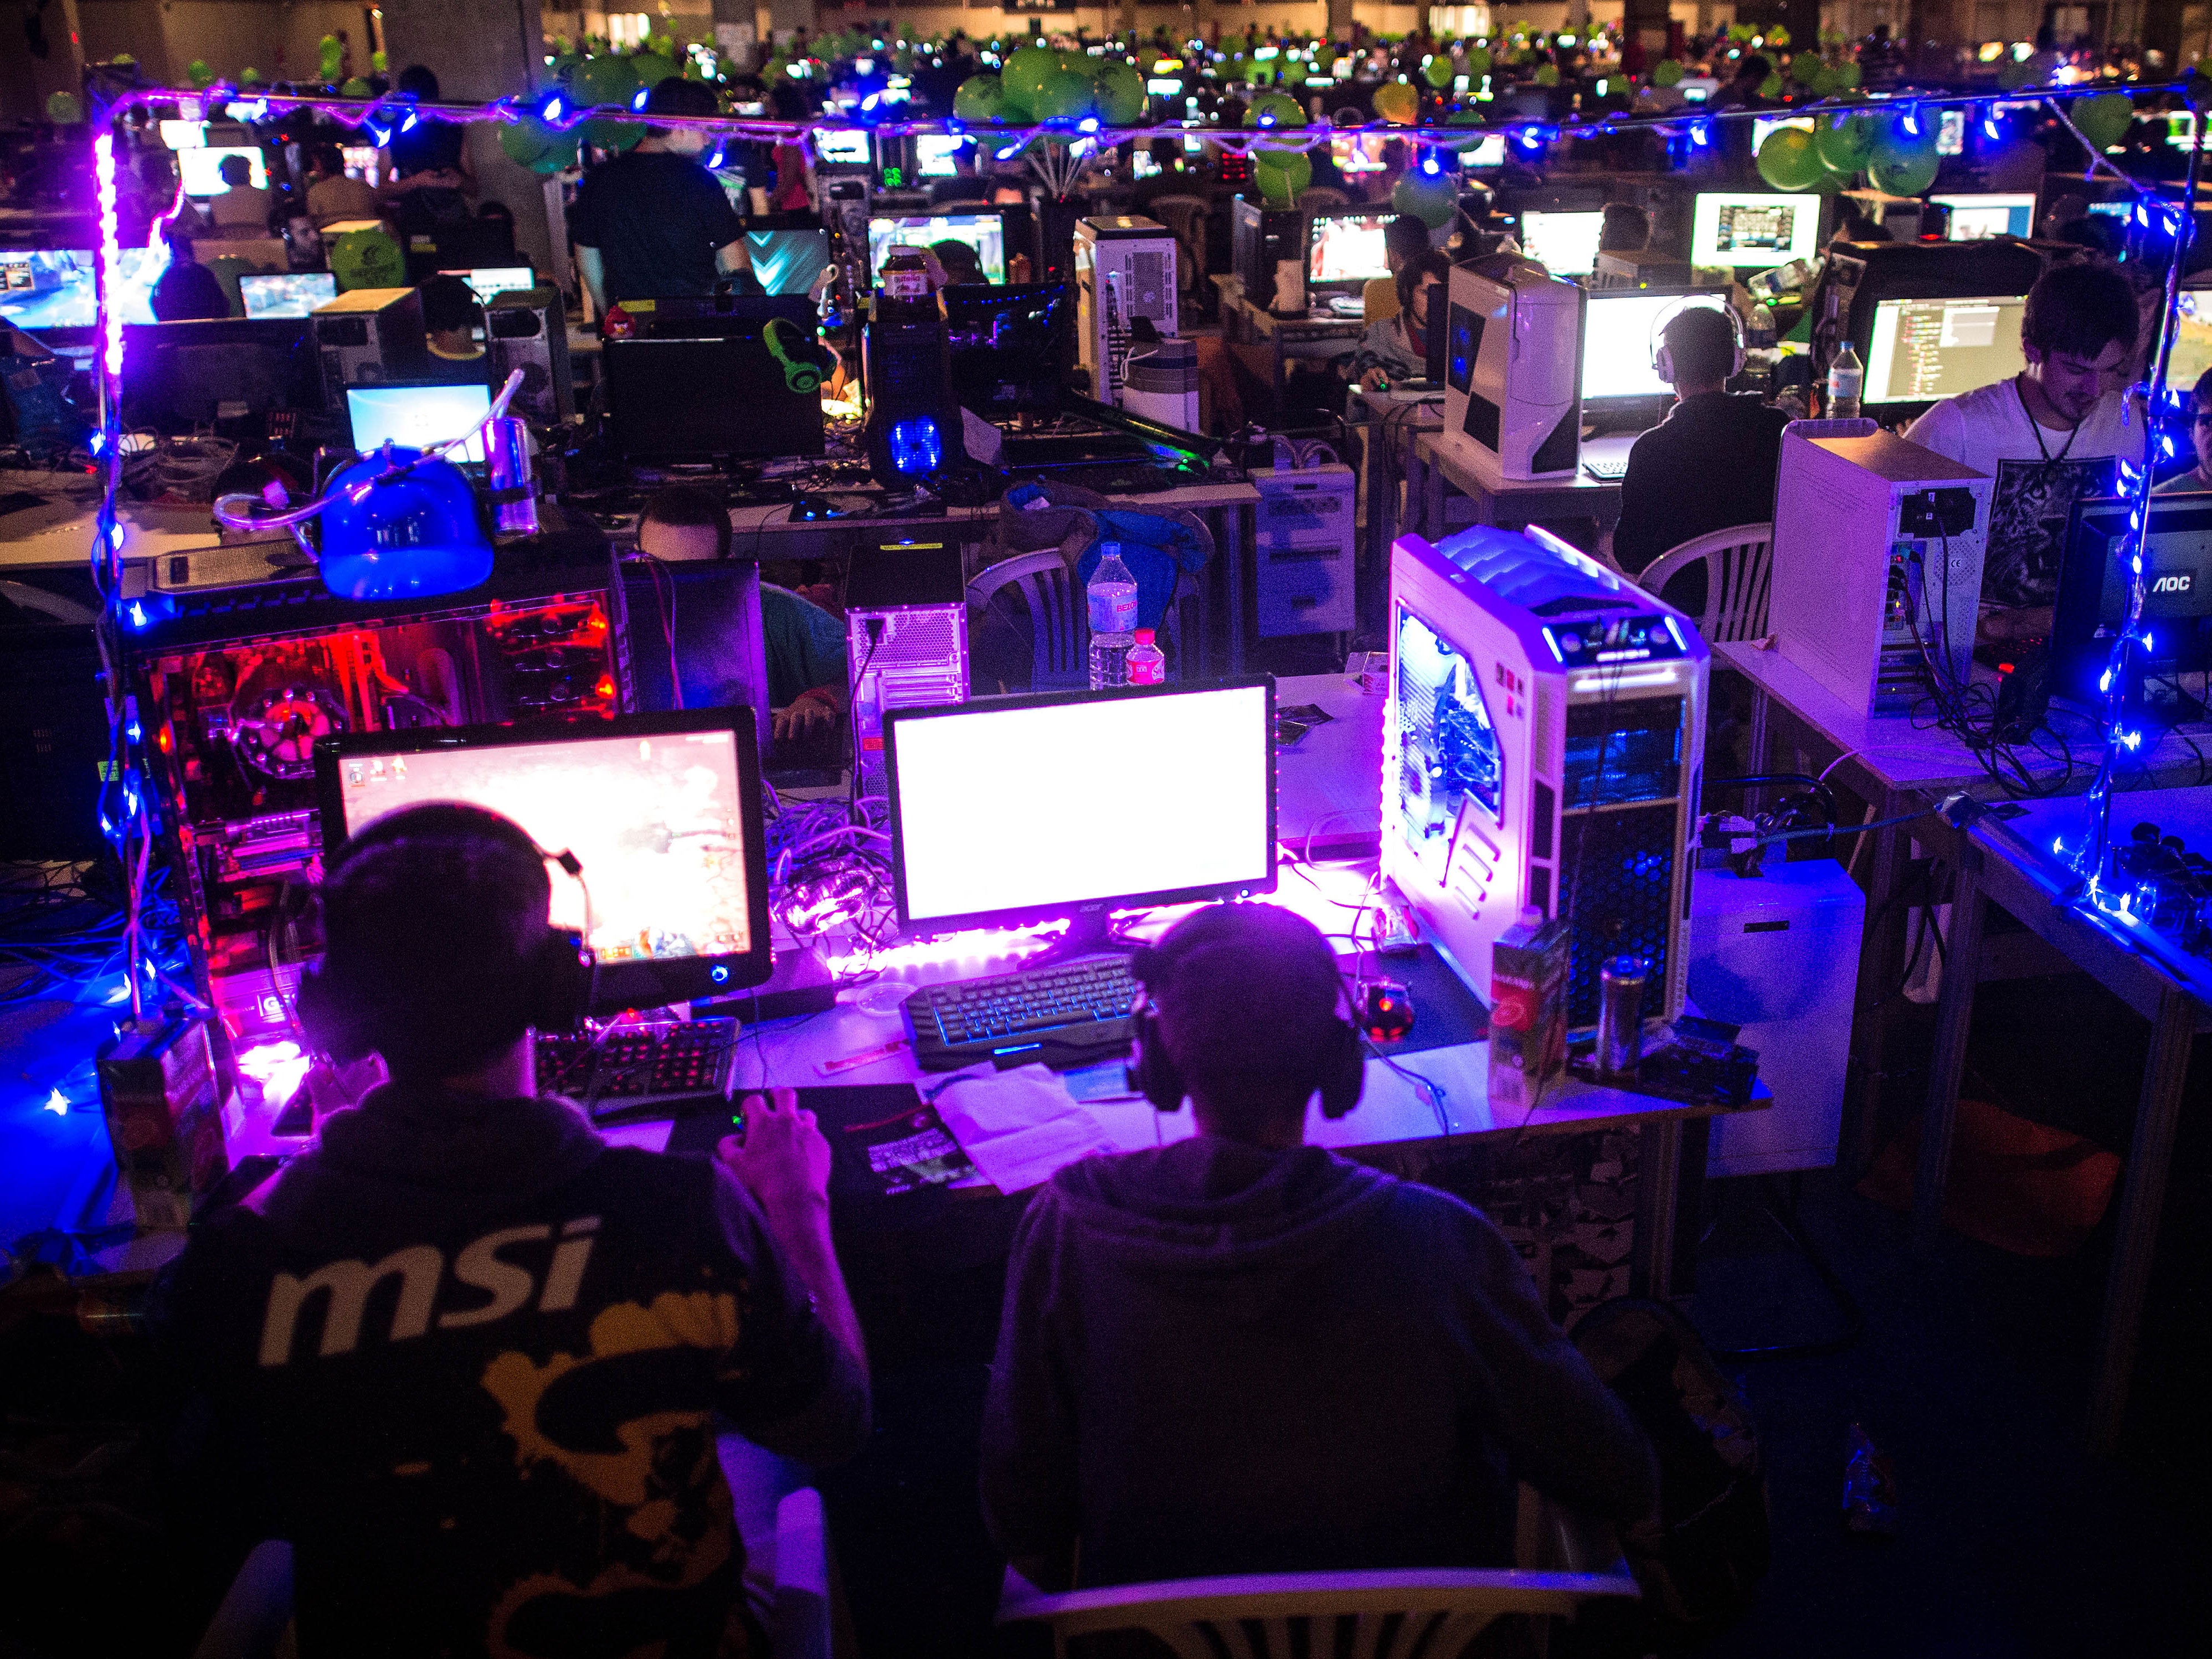 Participants play on their computers during the DreamHack Valencia 2014 on July 18, 2014 in Valencia, Spain